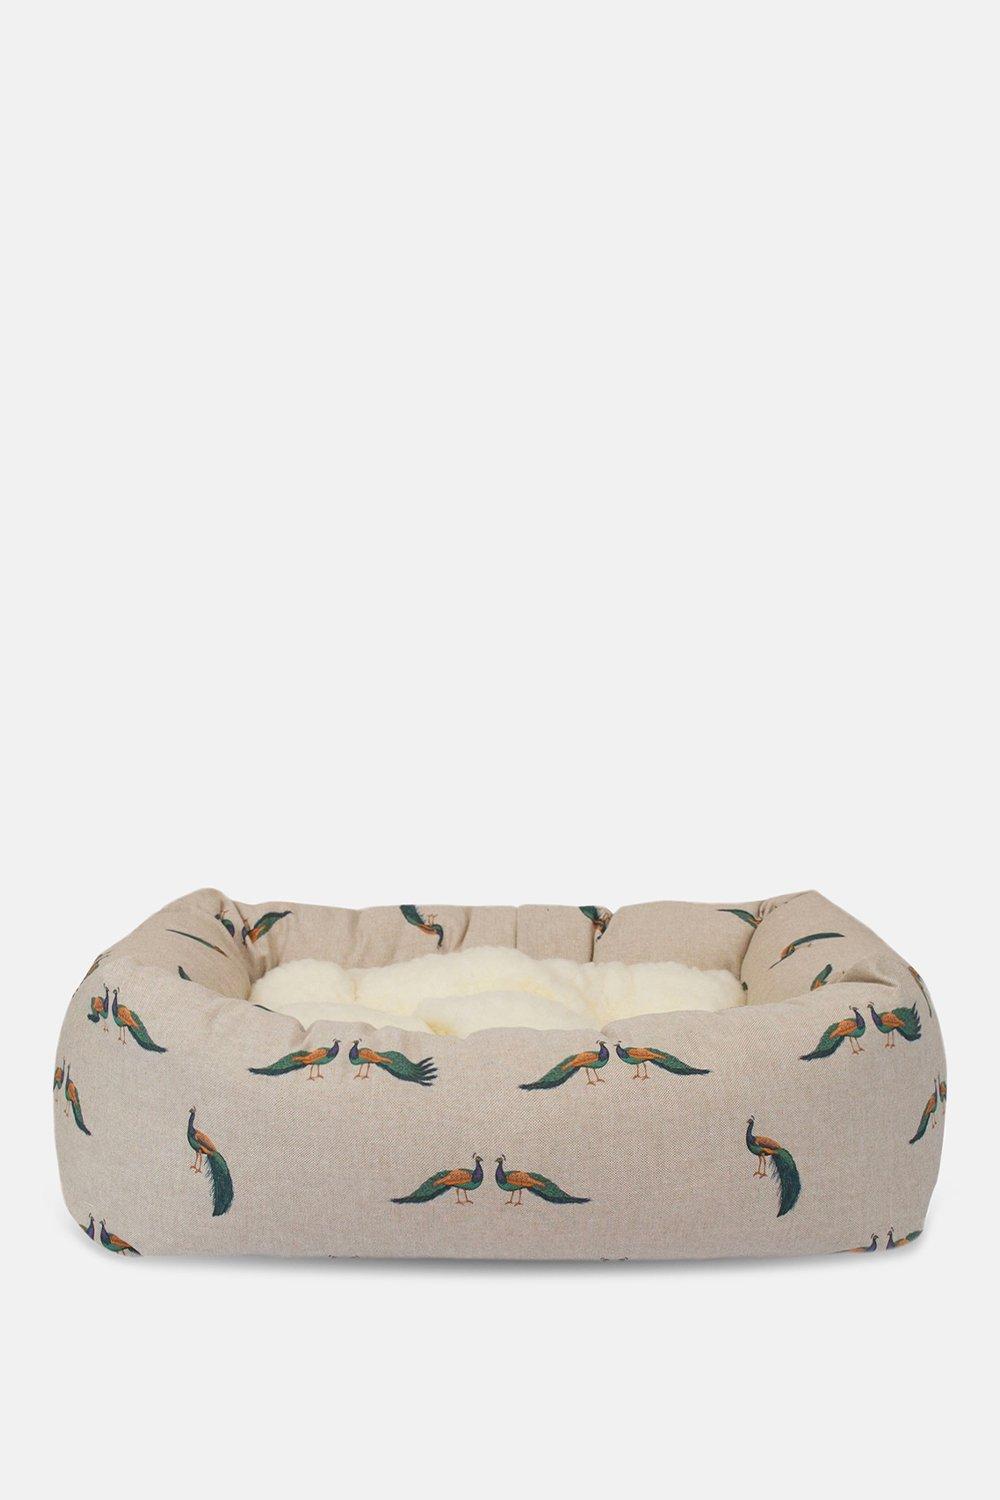 Woodlands Cosy & Calm Puppy Crate Bed - Peacock